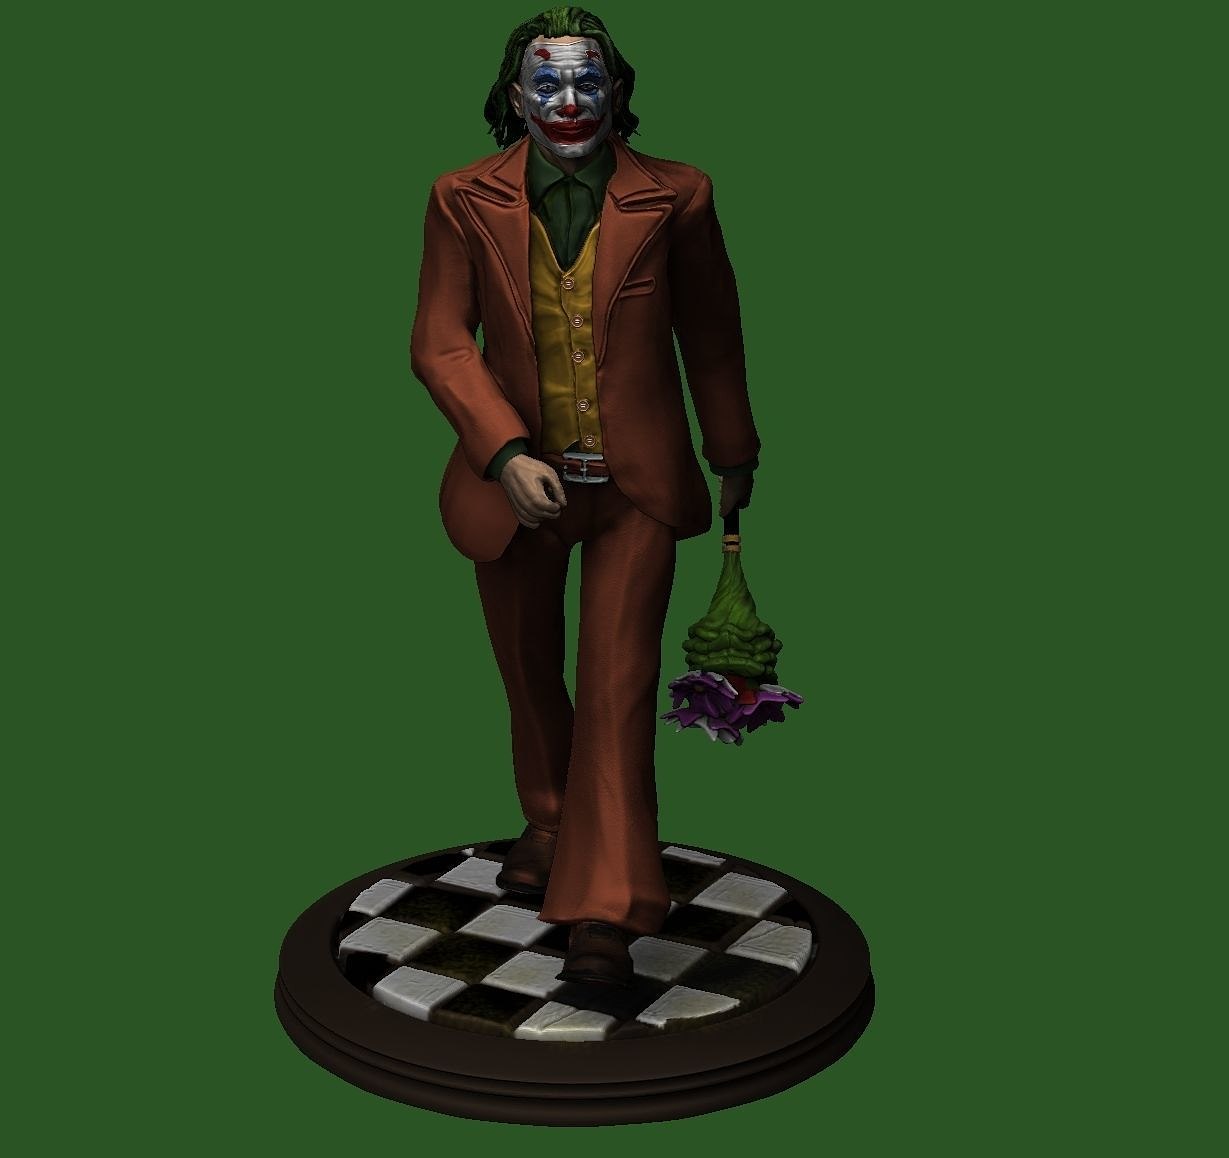 Joker with rose from DC